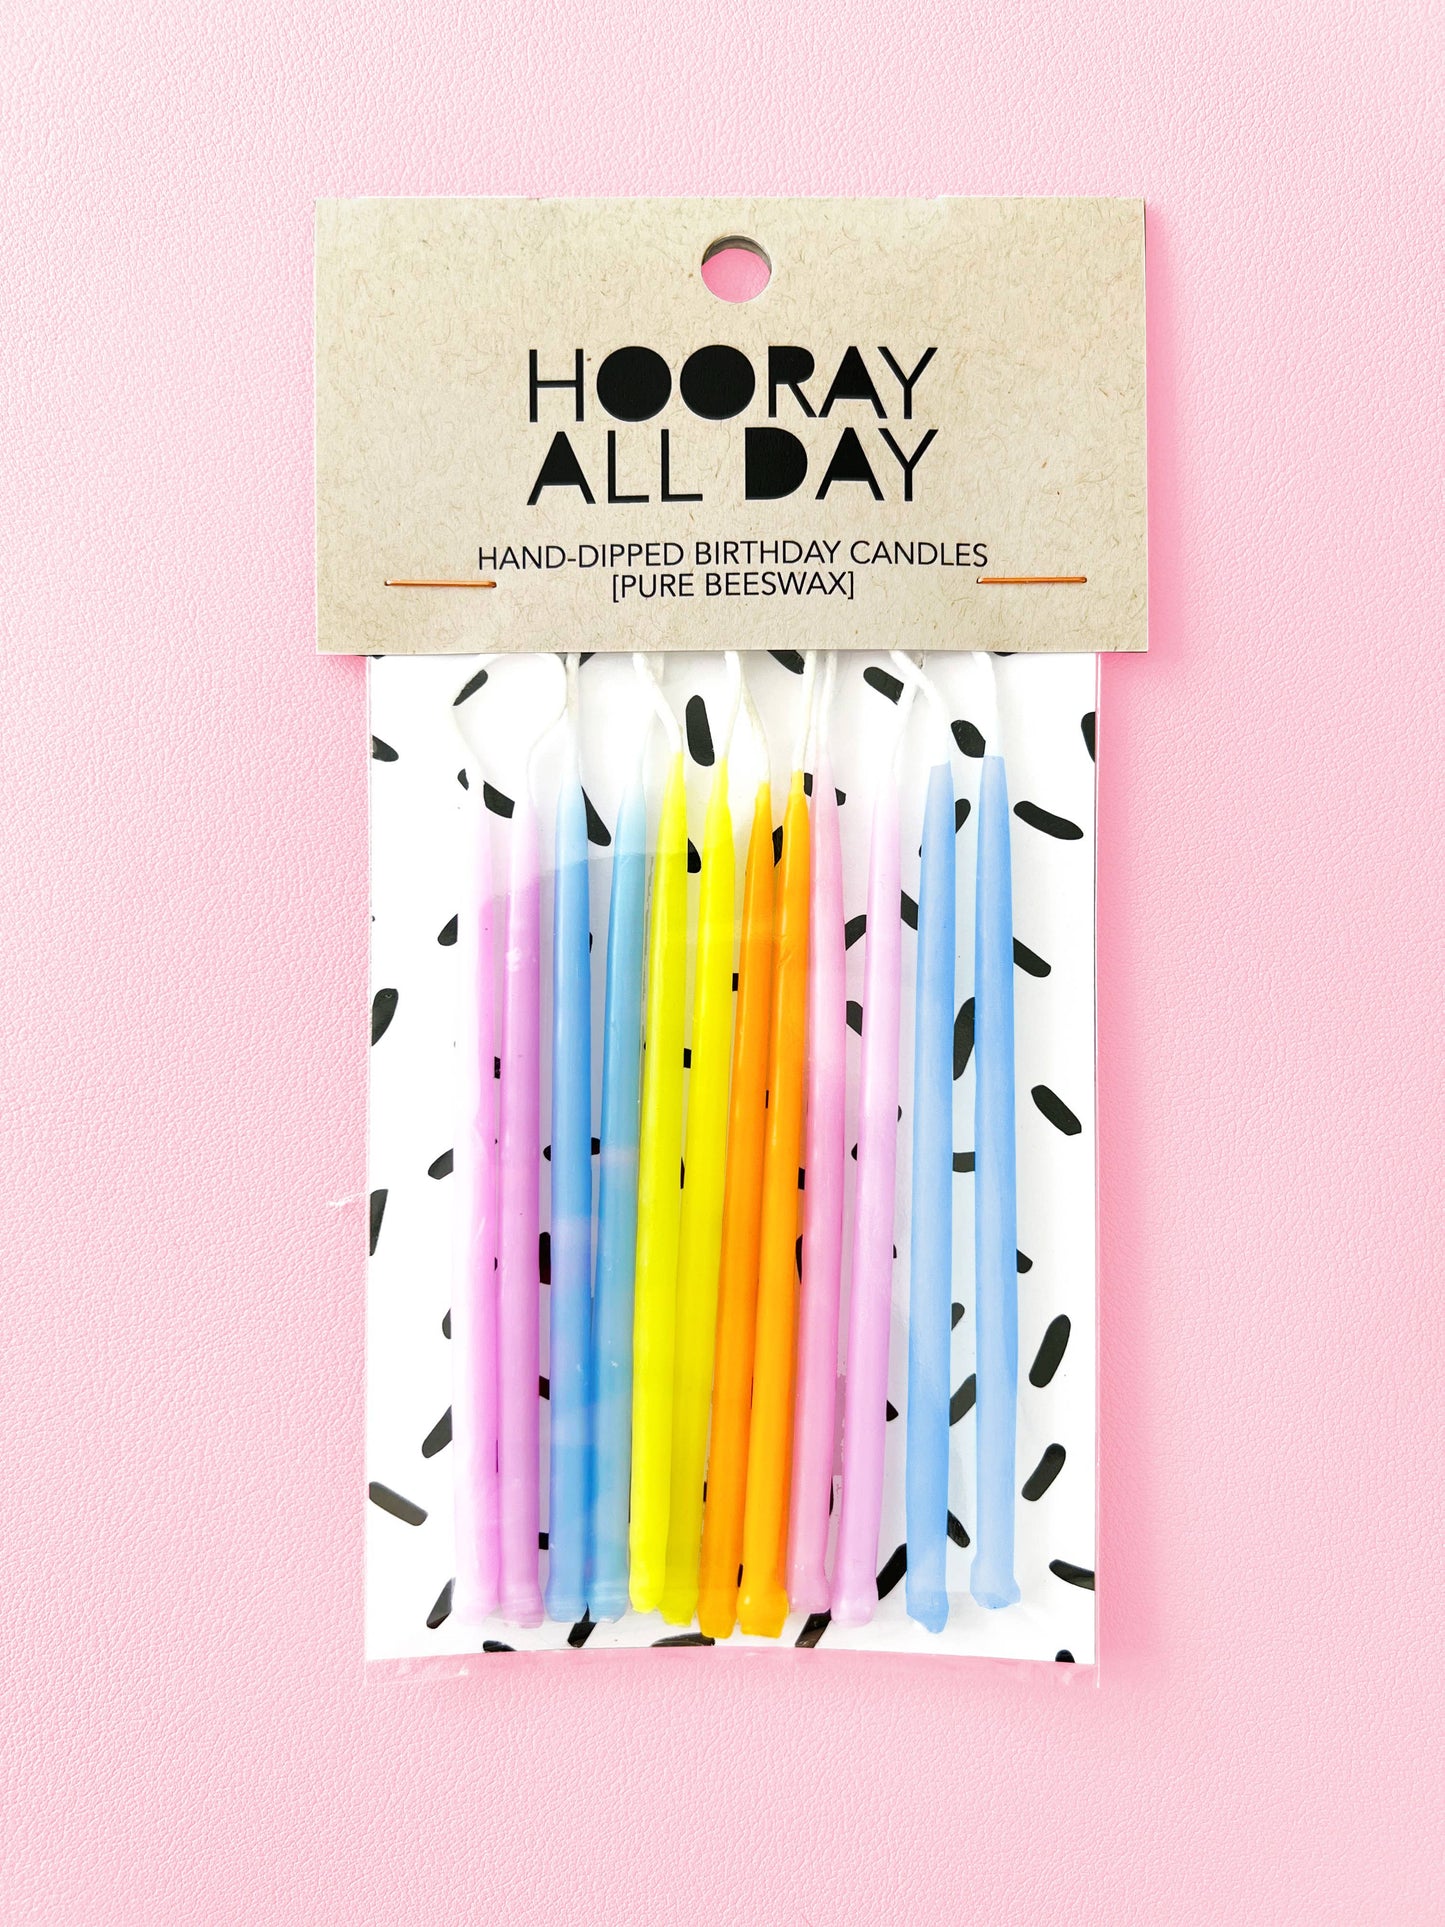 100% Beeswax Hand-Dipped Birthday Candles: Pinks